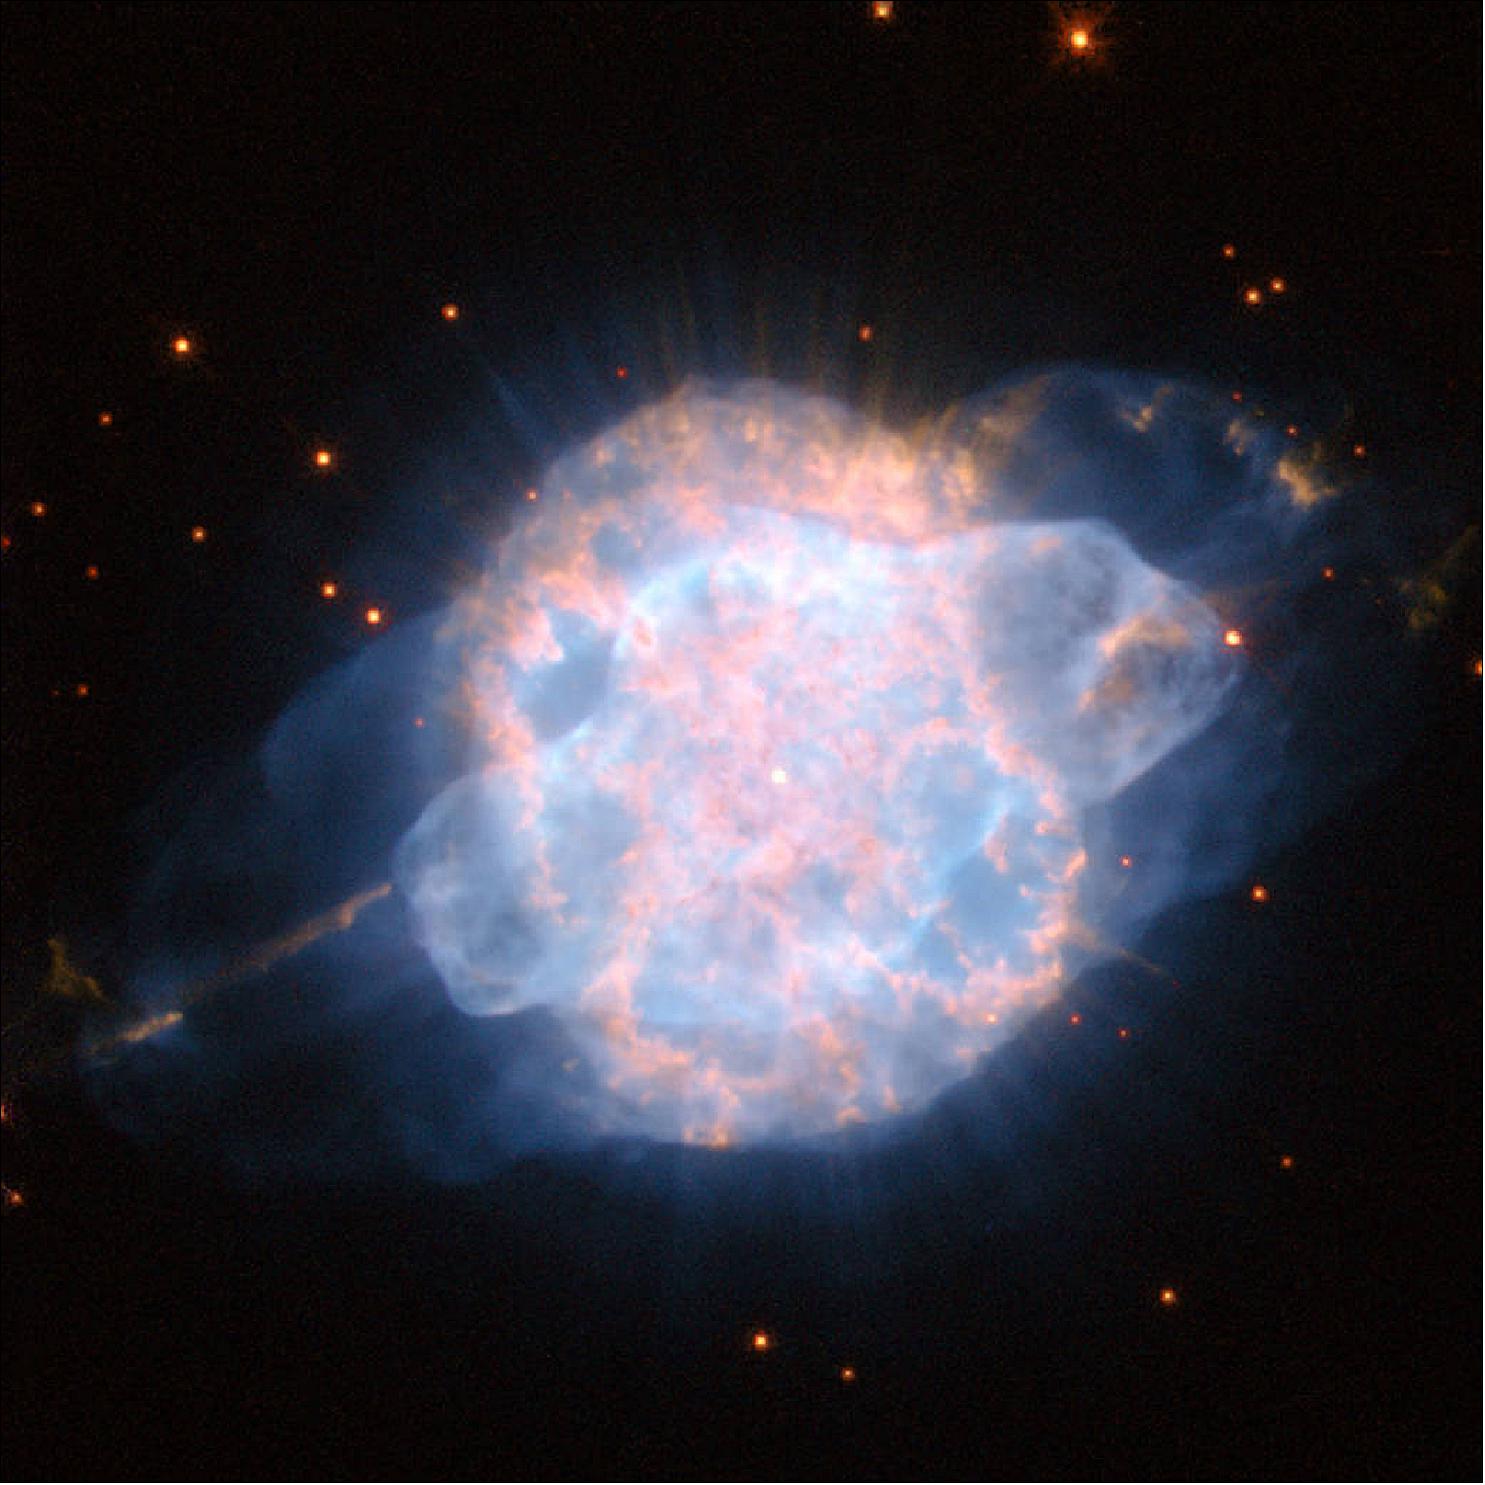 Figure 25: This Hubble image shows the planetary nebula NGC 3918, a brilliant cloud of colorful gas in the constellation of Centaurus. The image is a composite of visible and near-infrared snapshots taken with Hubble’s Wide Field and Planetary Camera 2 (image credit: ESA/Hubble and NASA)